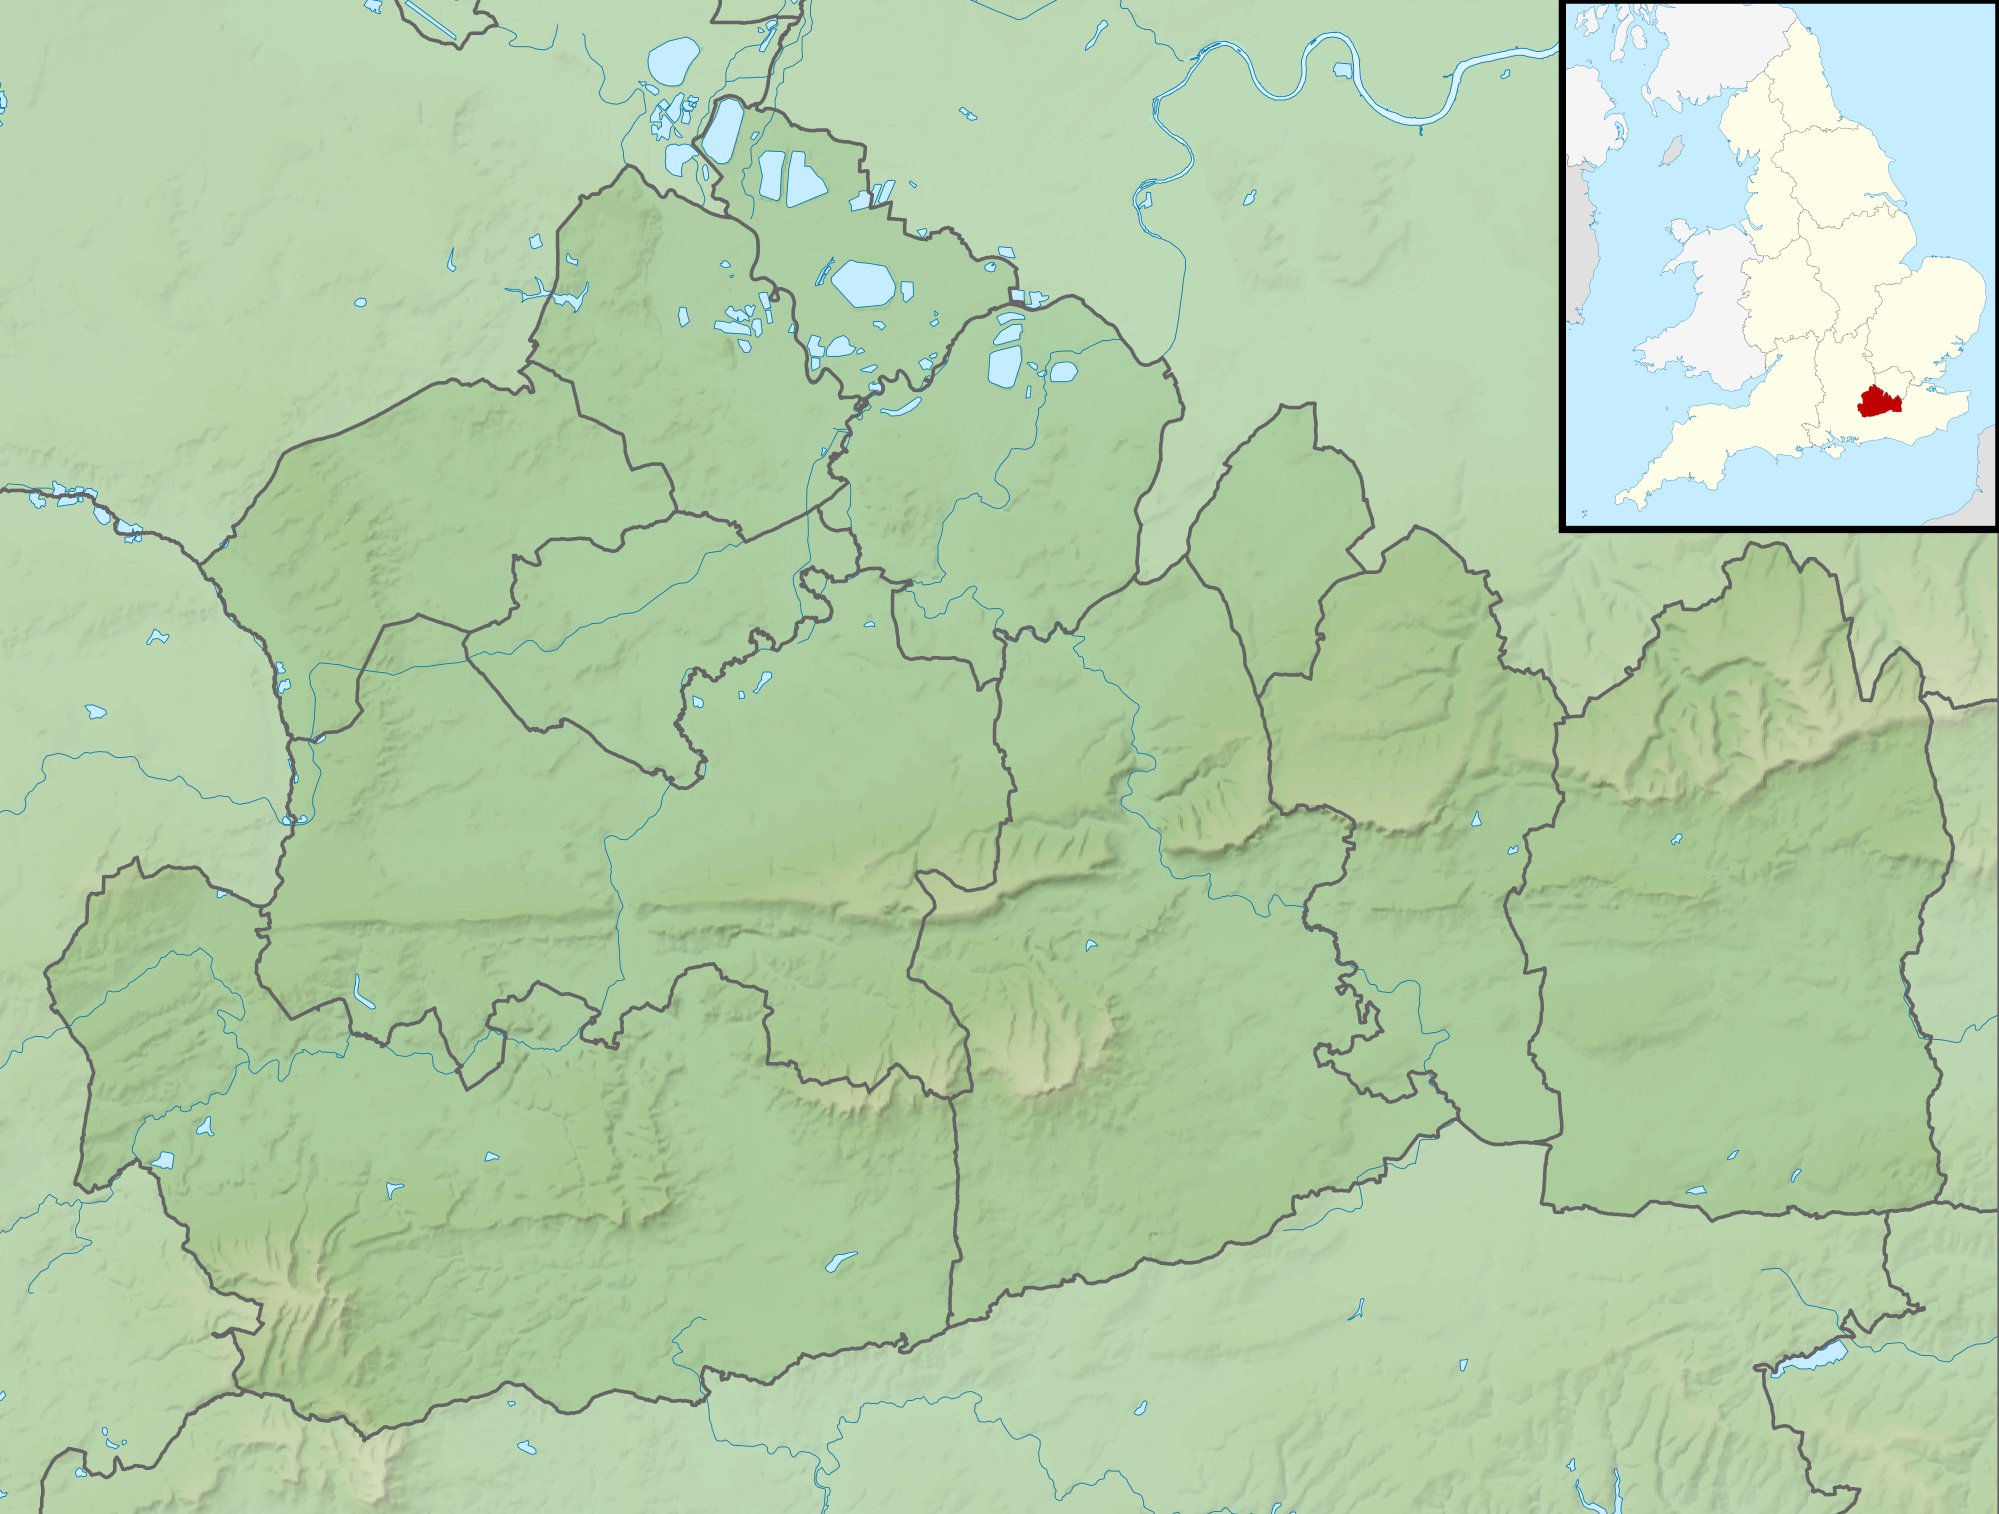 map of surrey uk File Surrey Uk Relief Location Map Jpg Wikimedia Commons